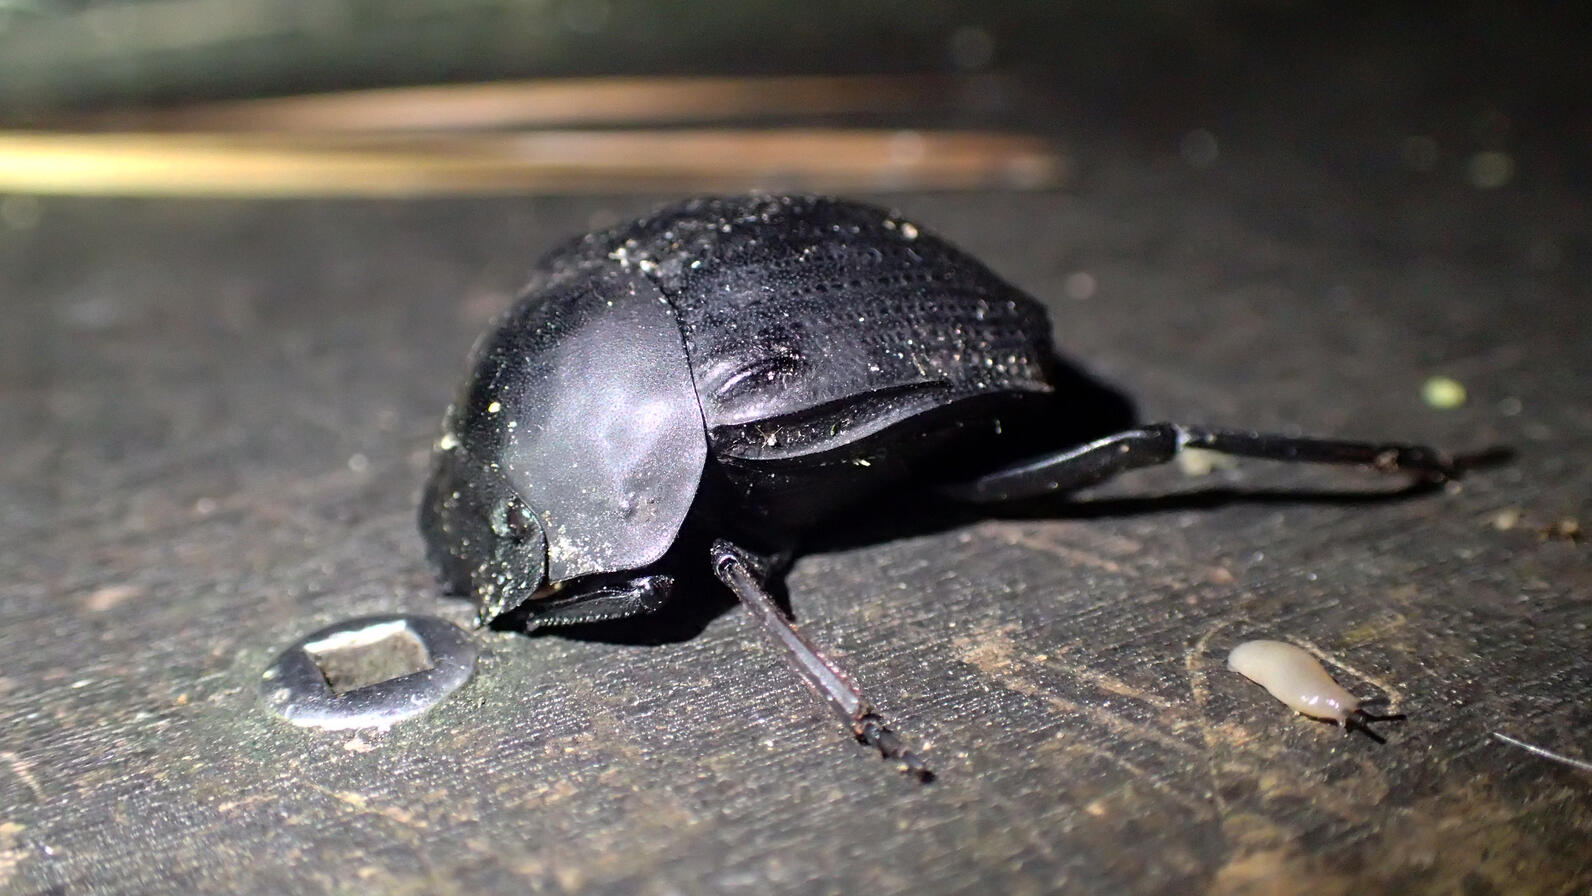 A beetle, about a half inch long with a round arching shell similar to the shape of a turtle rests with its face down against the boardwalk.